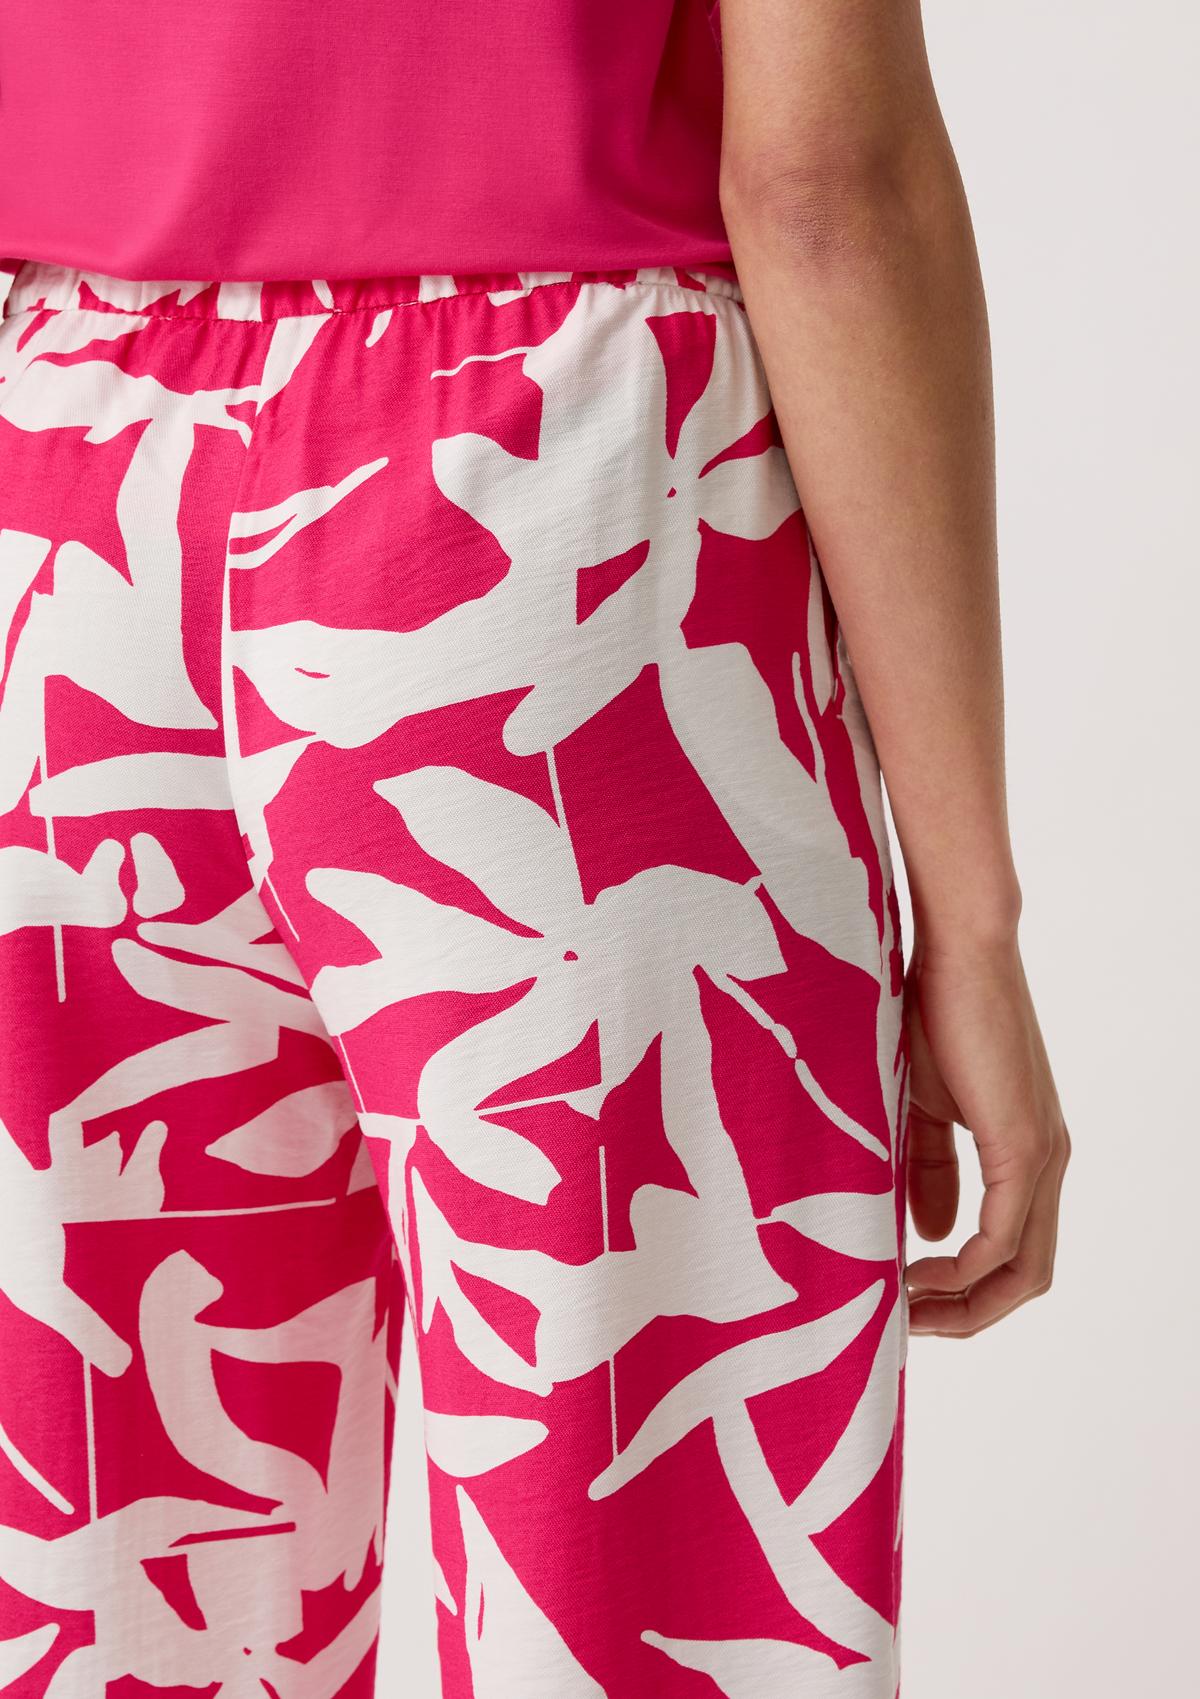 mit - Loose: Comma Hose Allover-Print pink |